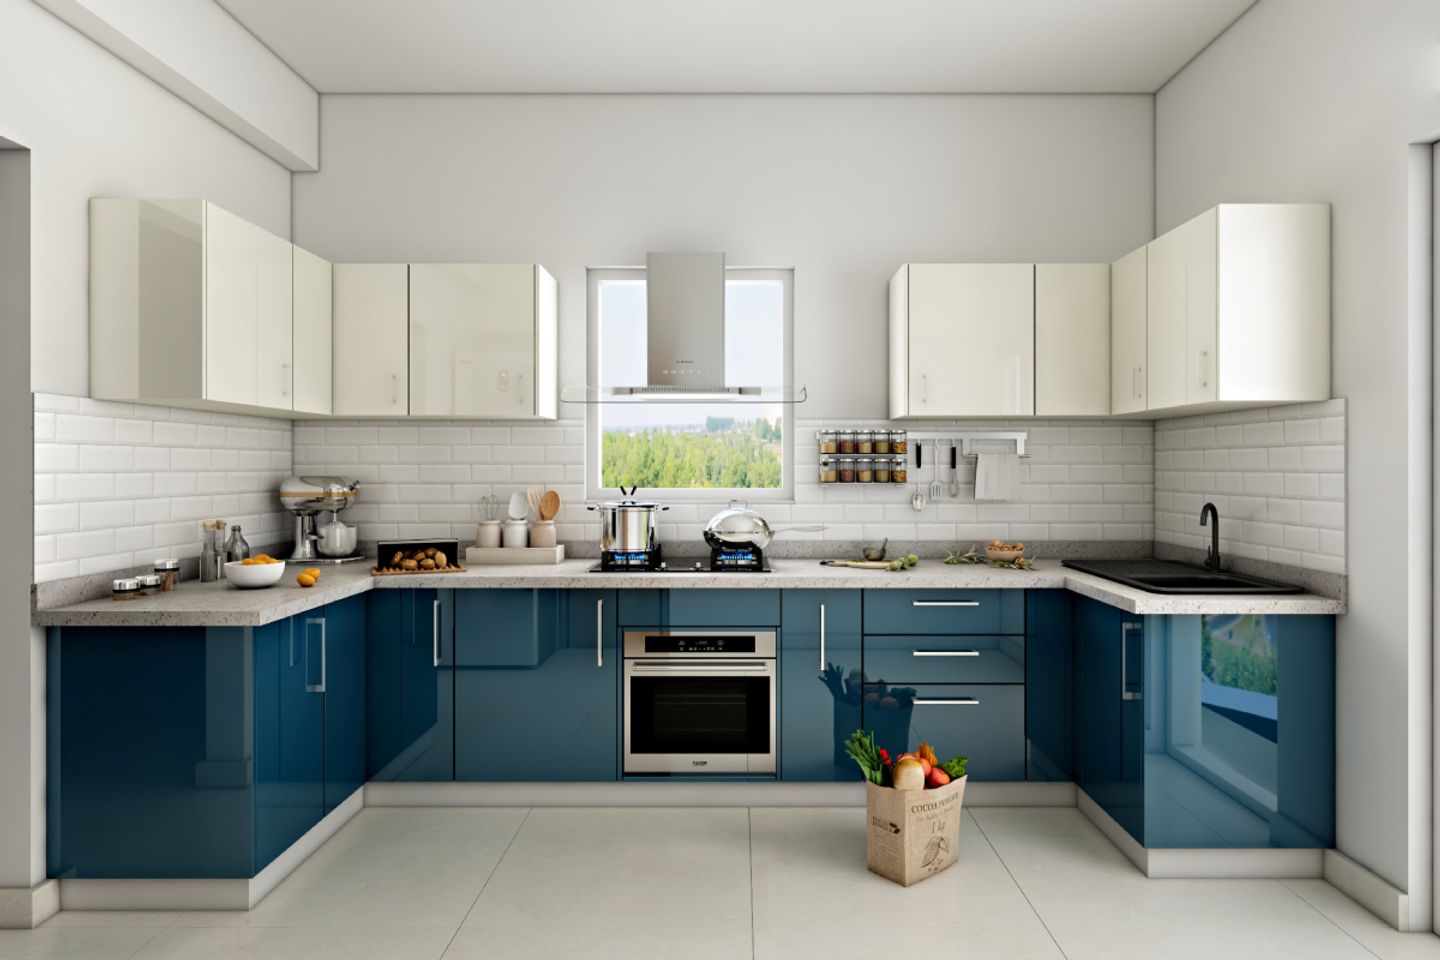 U-Shaped Kitchen Design With Blue And White Storage Units With A Glossy Laminate Finish - Livspace